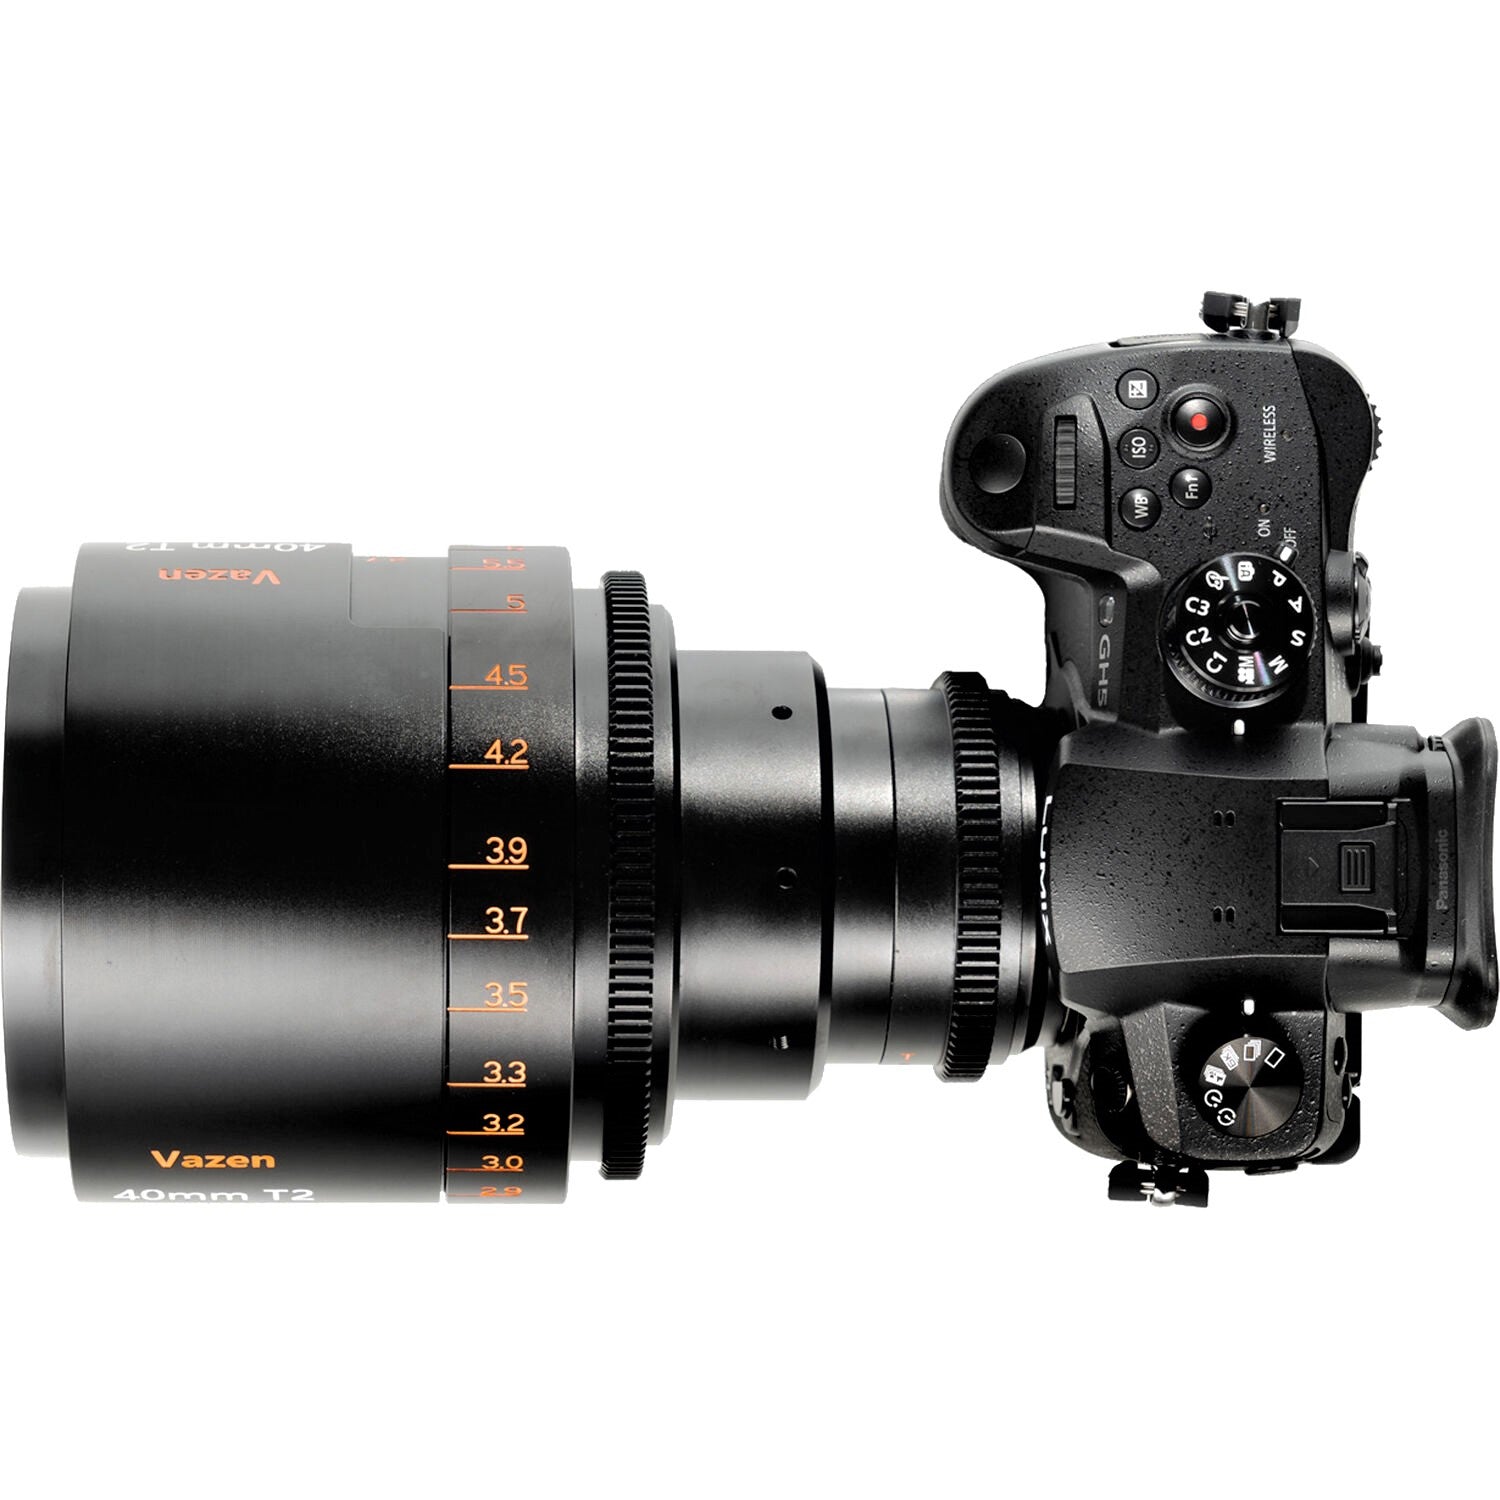 Vazen 40mm T/2 1.8X Anamorphic Lens (RF Mount, Amber Flare) from a Top View with Attached Camera on the Right Side